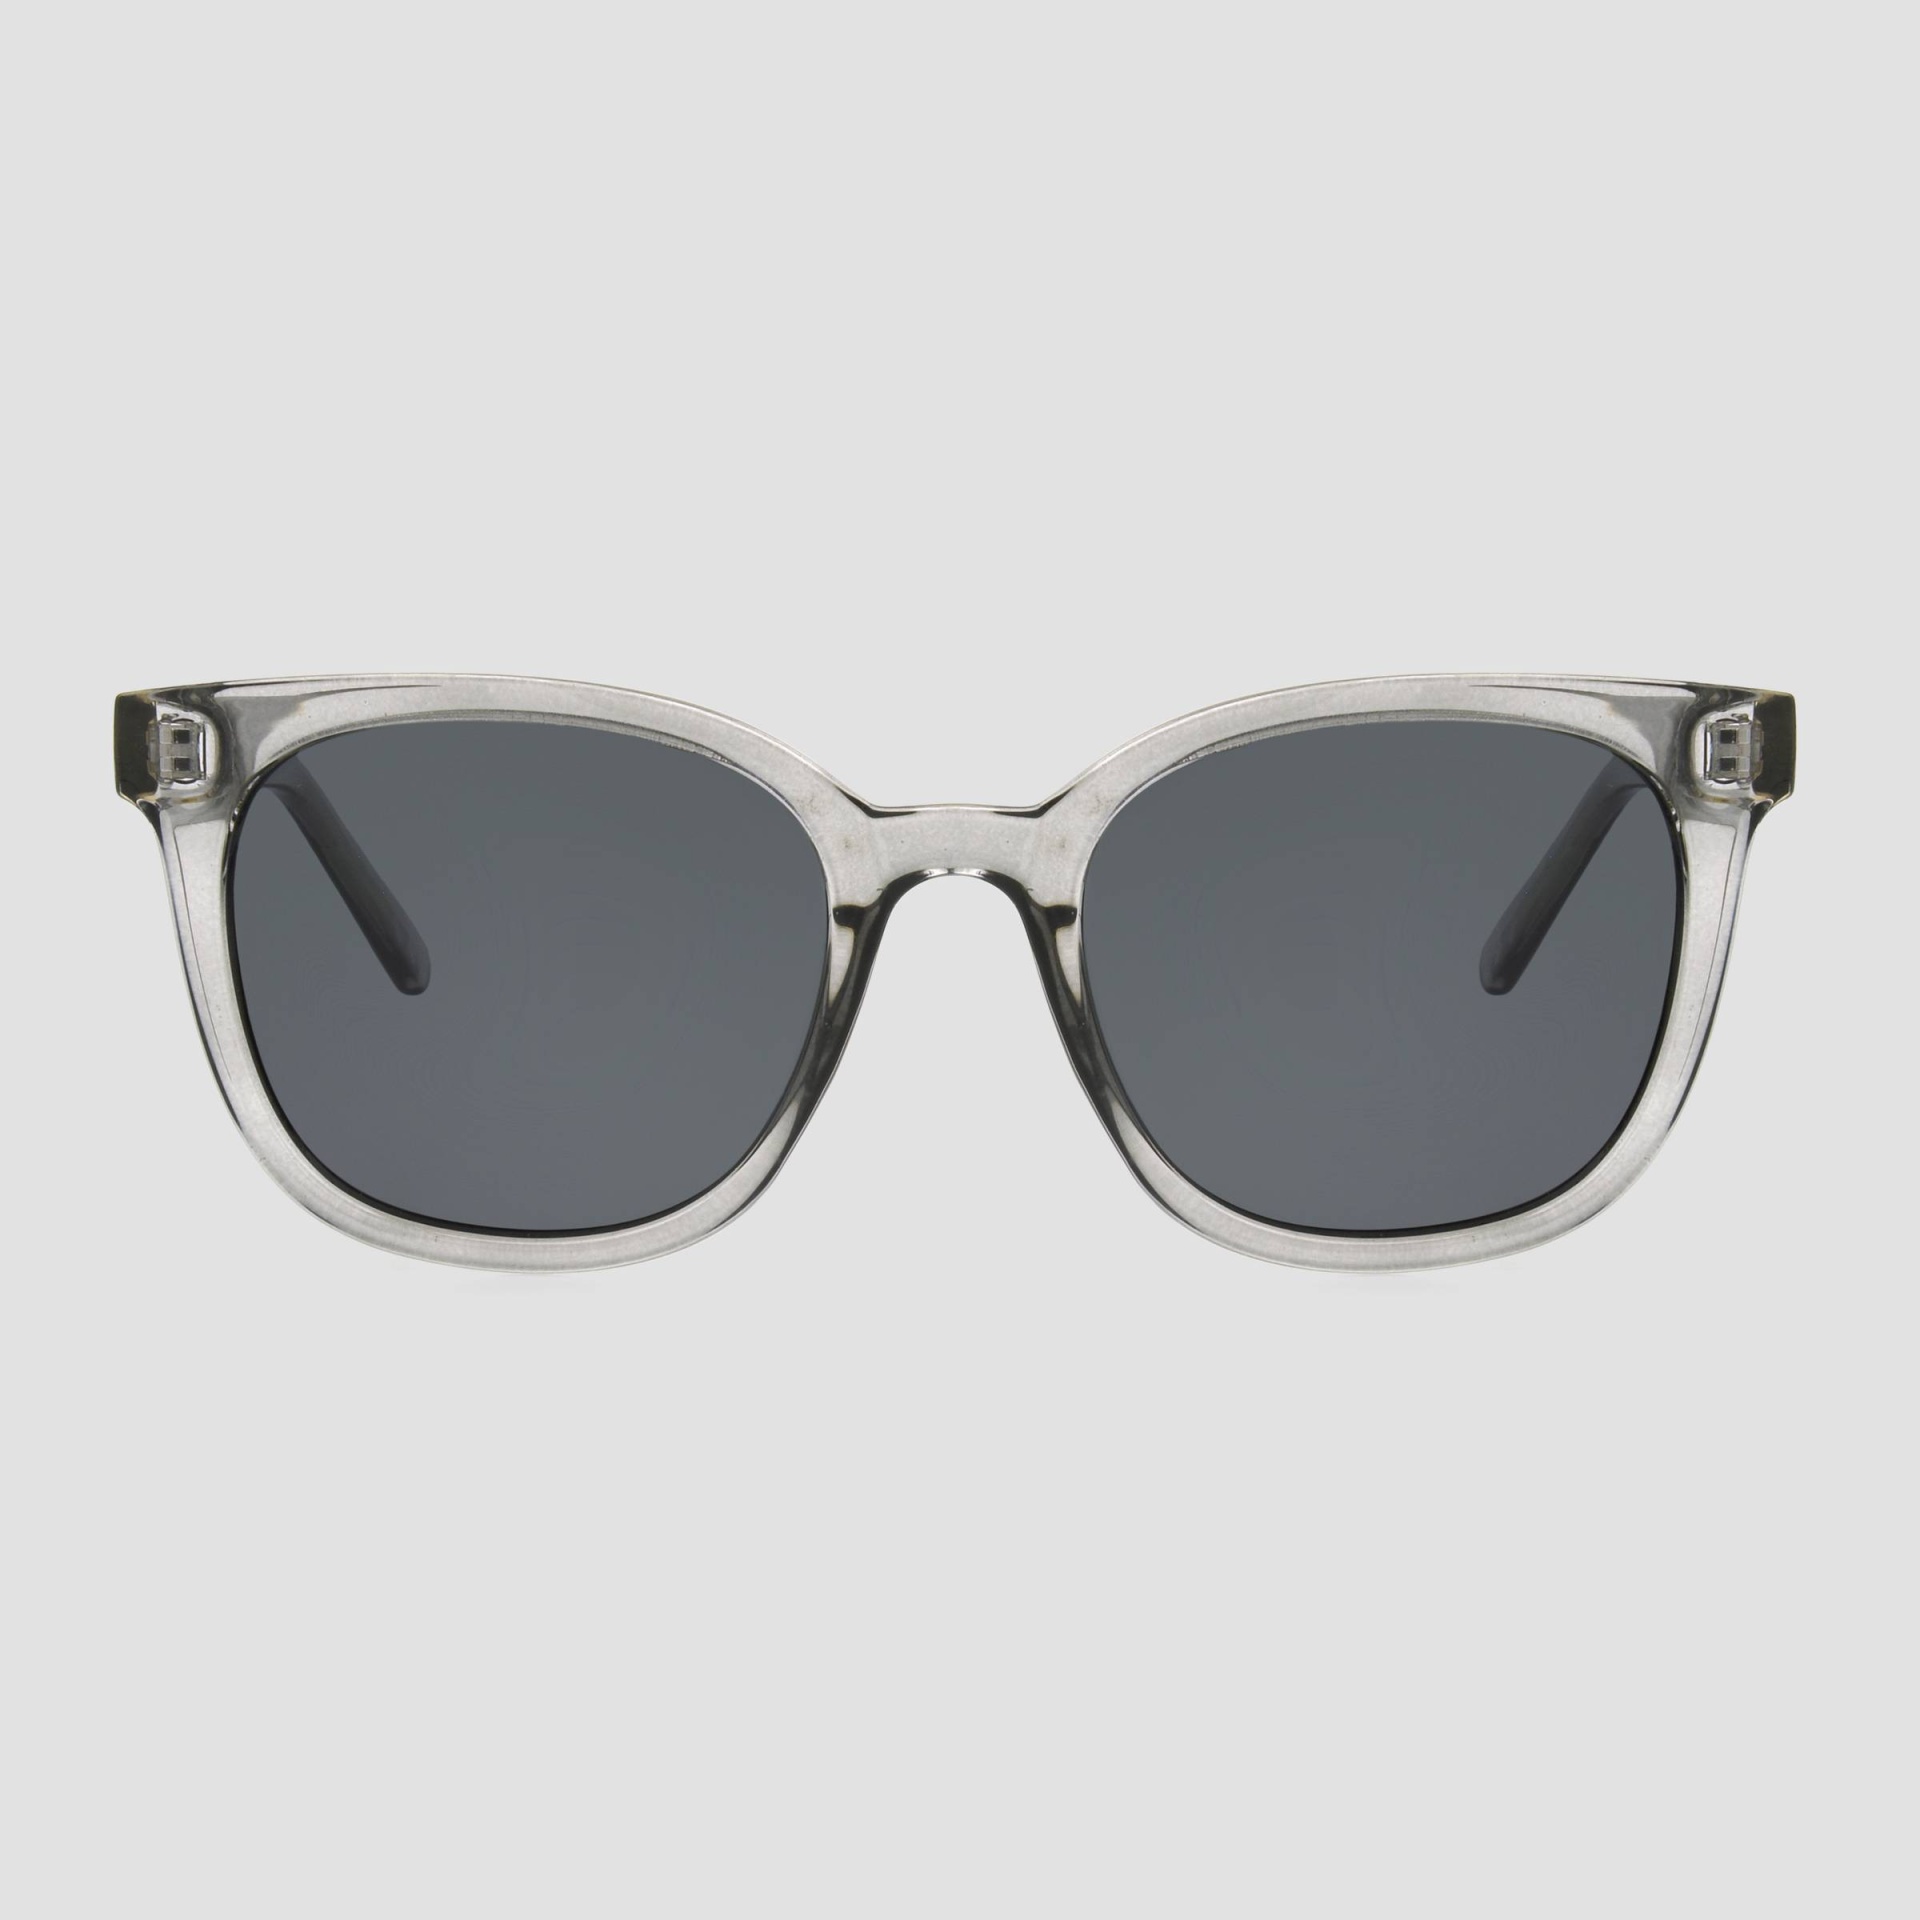 slide 1 of 2, Women's Crystal Surfer Shade Sunglasses with Smoke Polarized Lenses - A New Day Gray, 1 ct